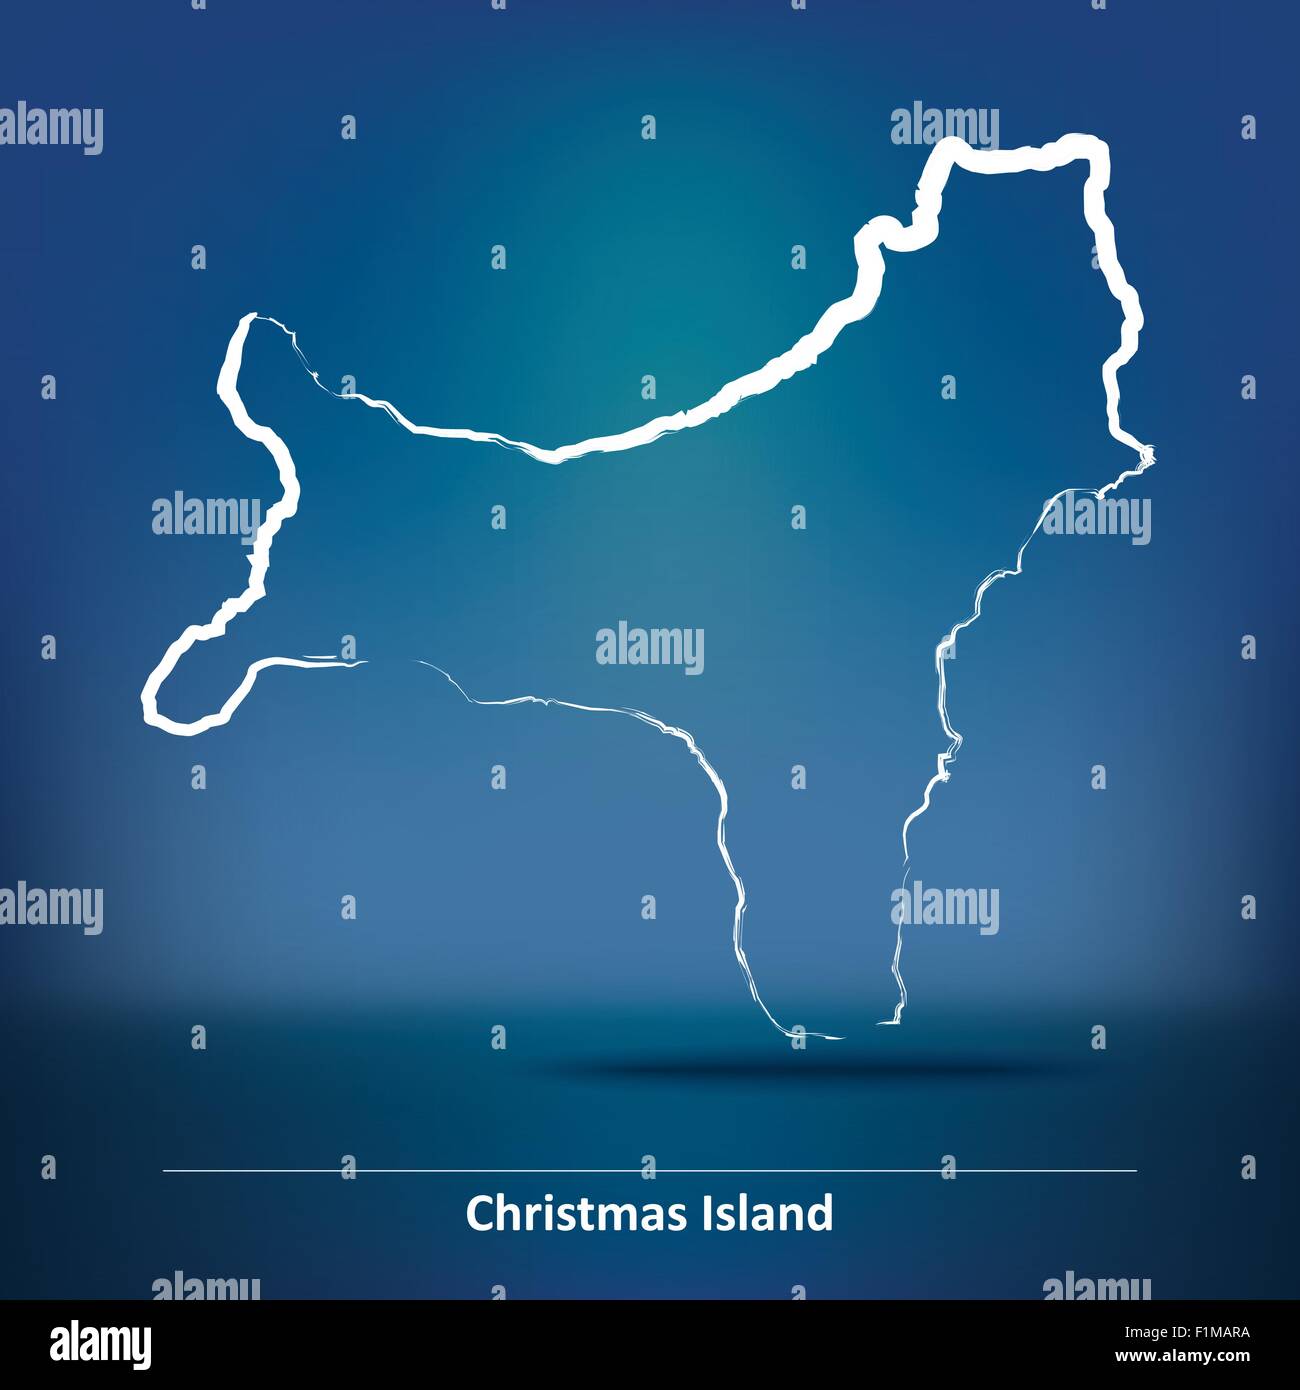 Doodle Map of Christmas Island - vector illustration Stock Vector